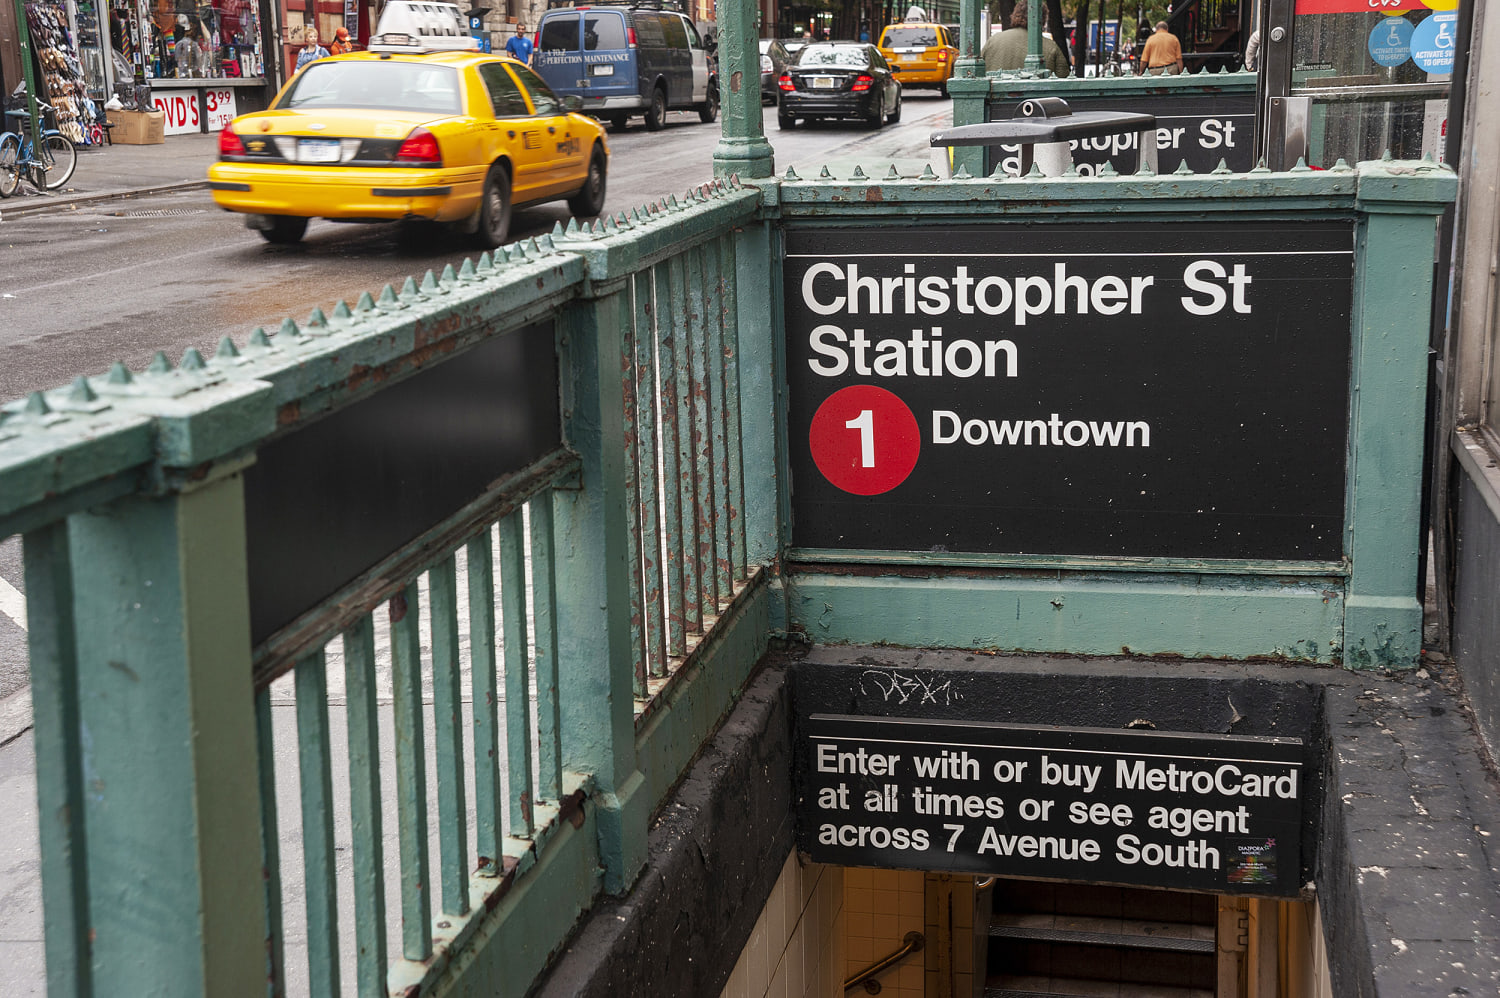 Bill would rename NYC subway stop after Stonewall, a landmark in LGBTQ+ rights movement